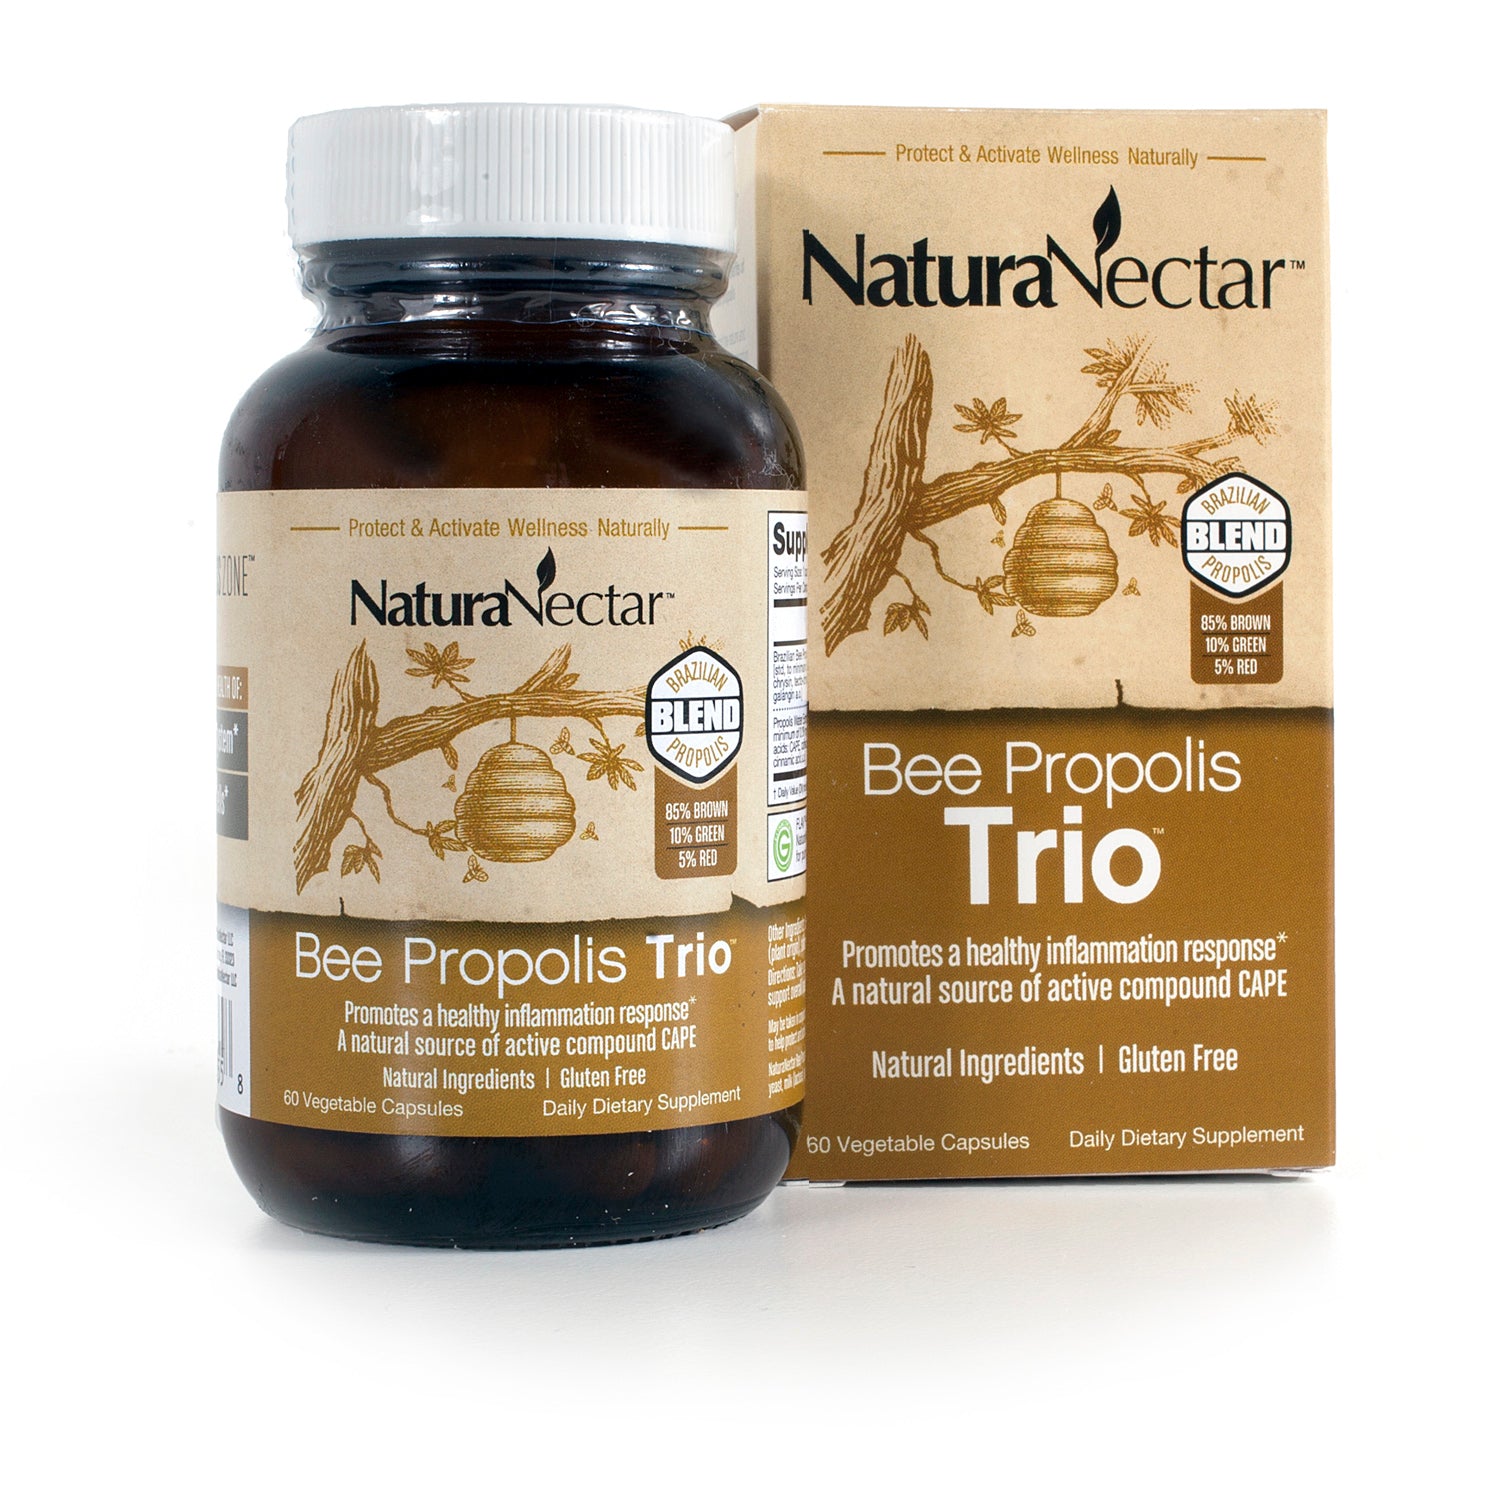 Bee Propolis Trio - Daily support for your immune system* with specific polyphenols that may promote liver & prostate health*